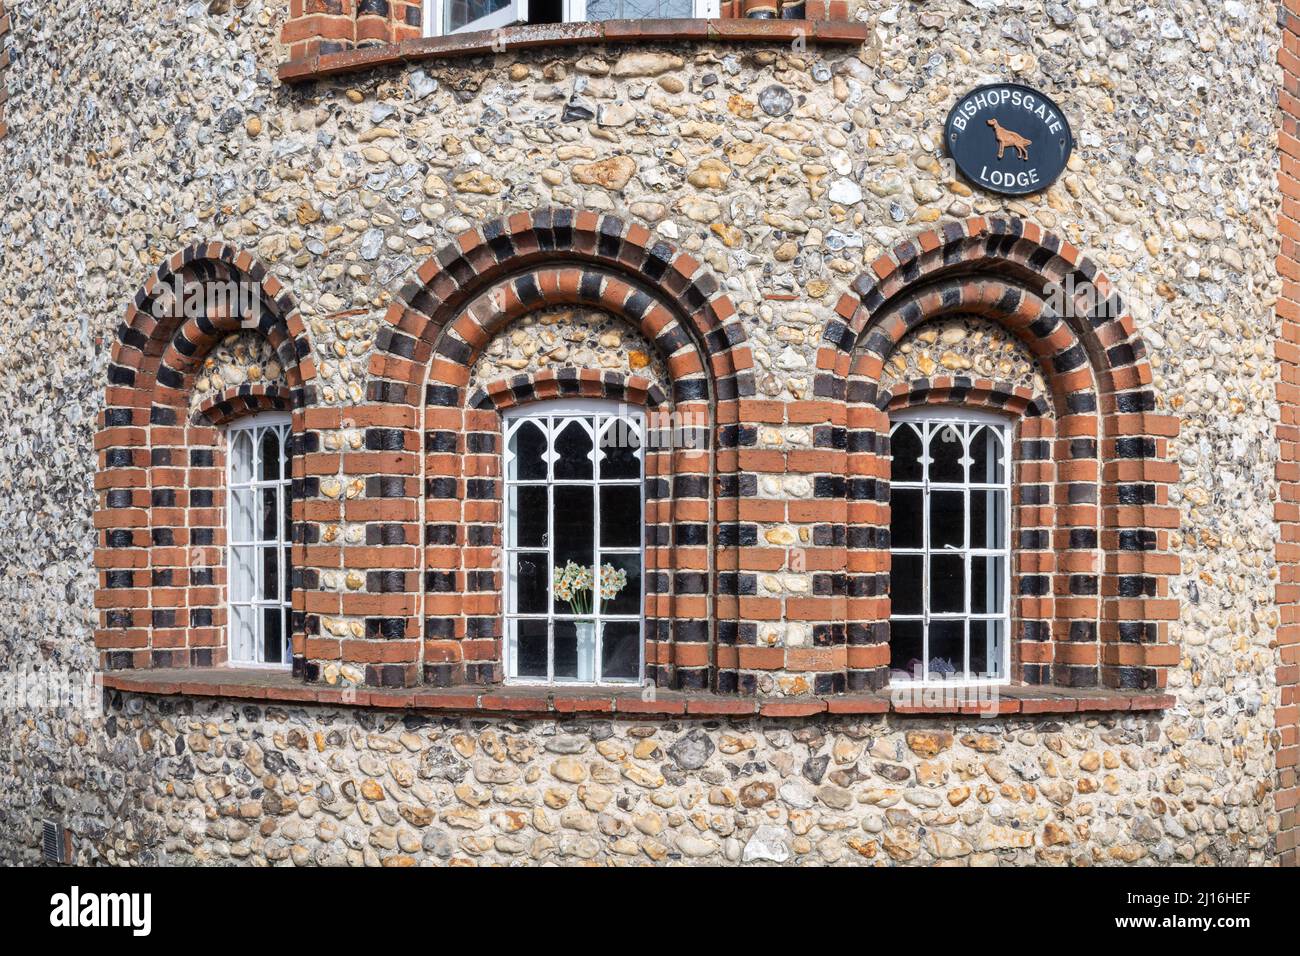 Detail of rubble masonry building style in East Horsley, Surrey, England, UK. Bishopsgate lodge at entrance to Horsley Towers and estate. Stock Photo